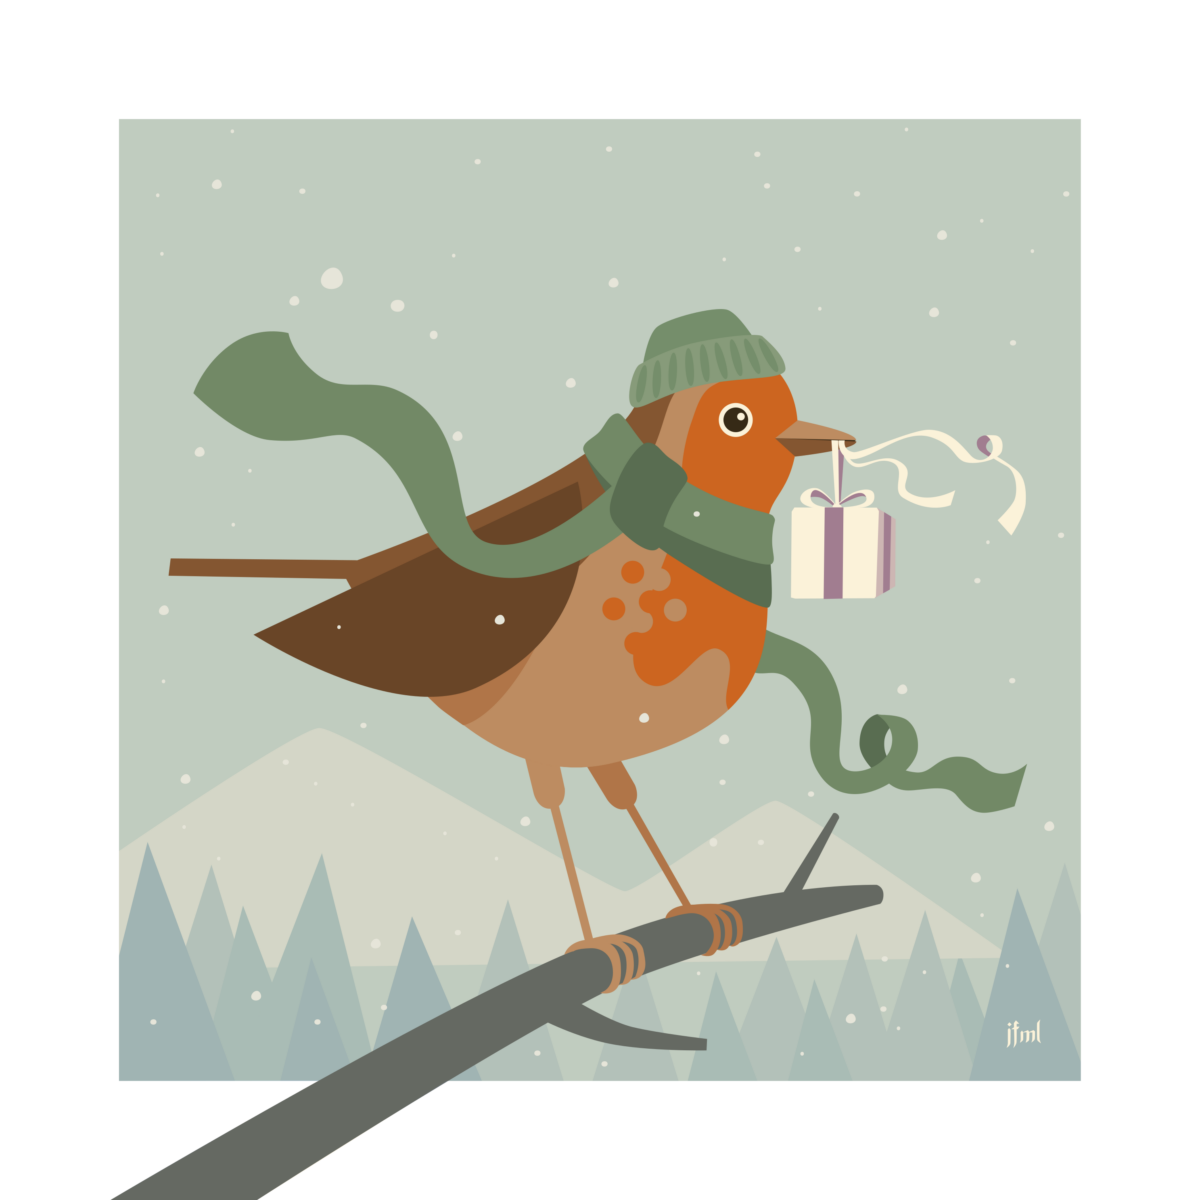 Vector illustration of a robin sitting on a branch in front of a snowy landscape. They're wearing a green woolly hat and scarf, holding a tiny present via the ribbon in their beak